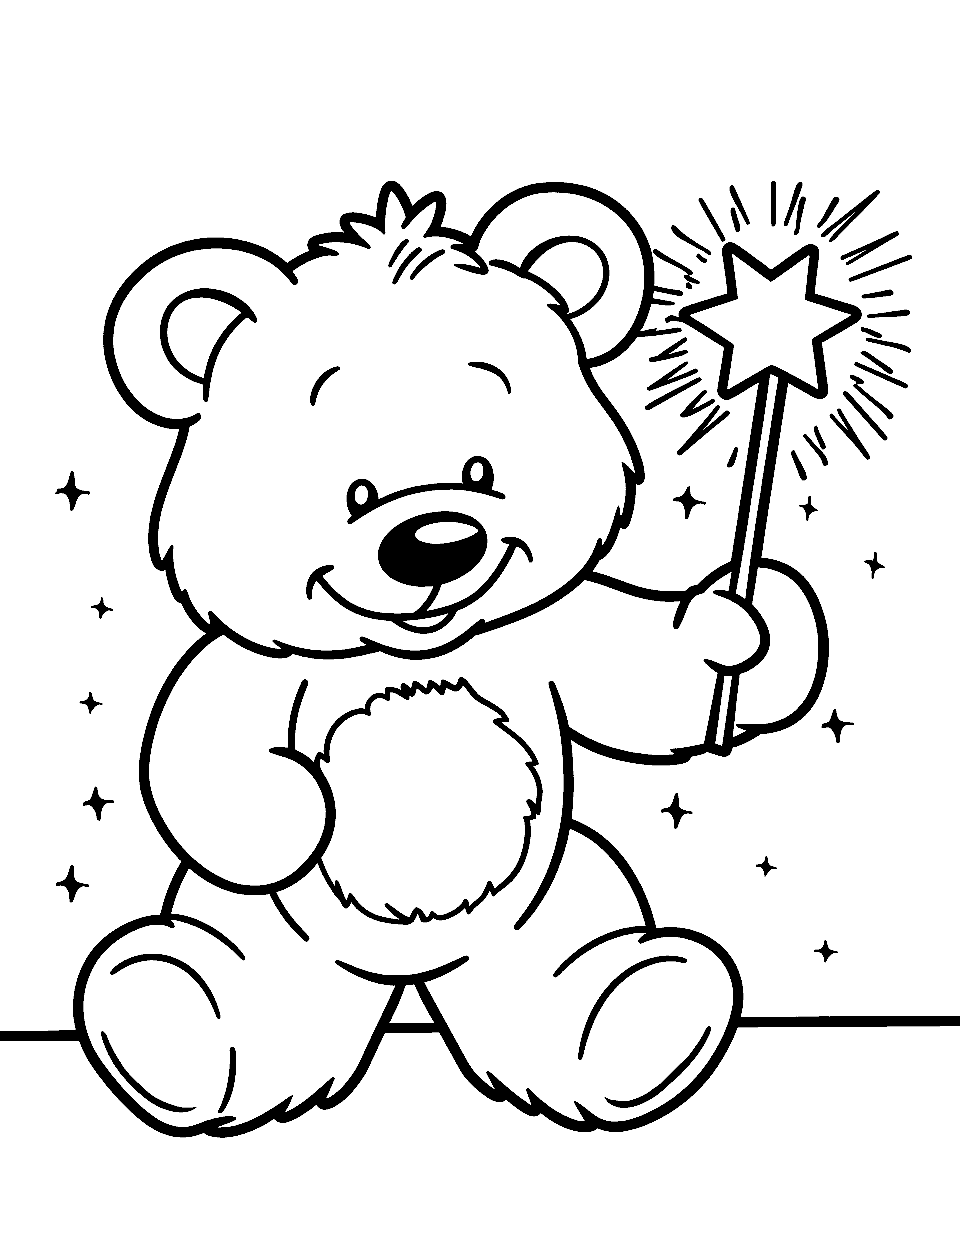 Teddy Bear with a Magic Wand Coloring Page - A teddy bear holding a magic wand with sparkles.